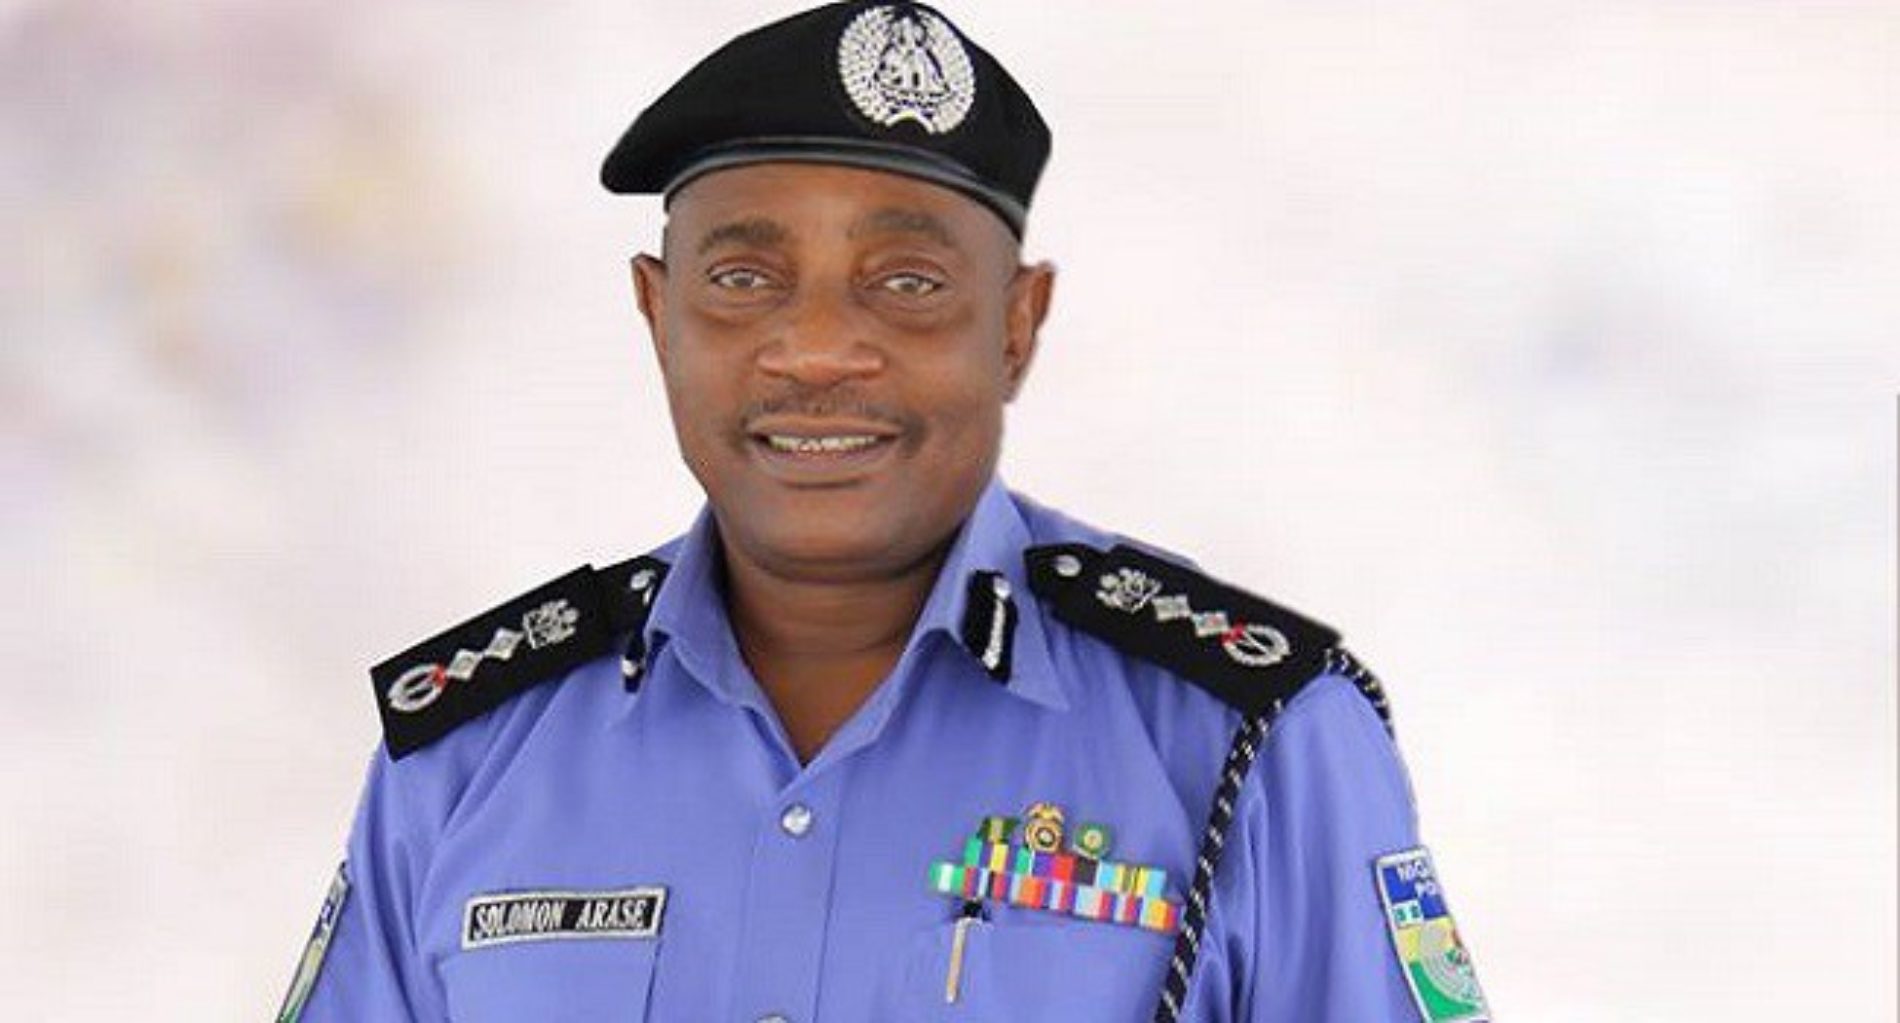 IG bans policemen from searching civilian mobile phones without warrant